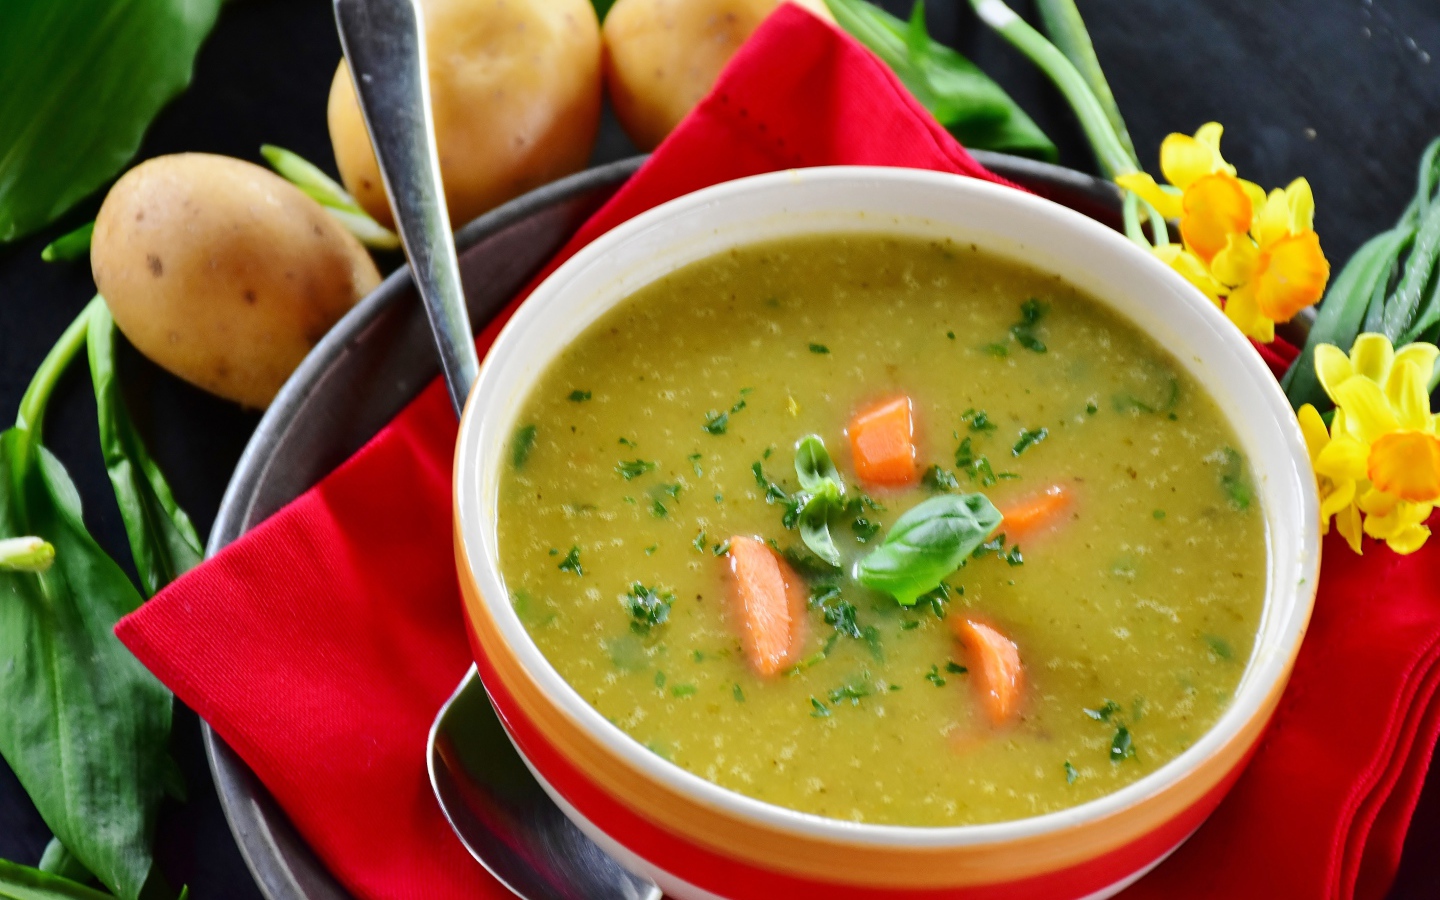 Puree pea soup on the table with potatoes